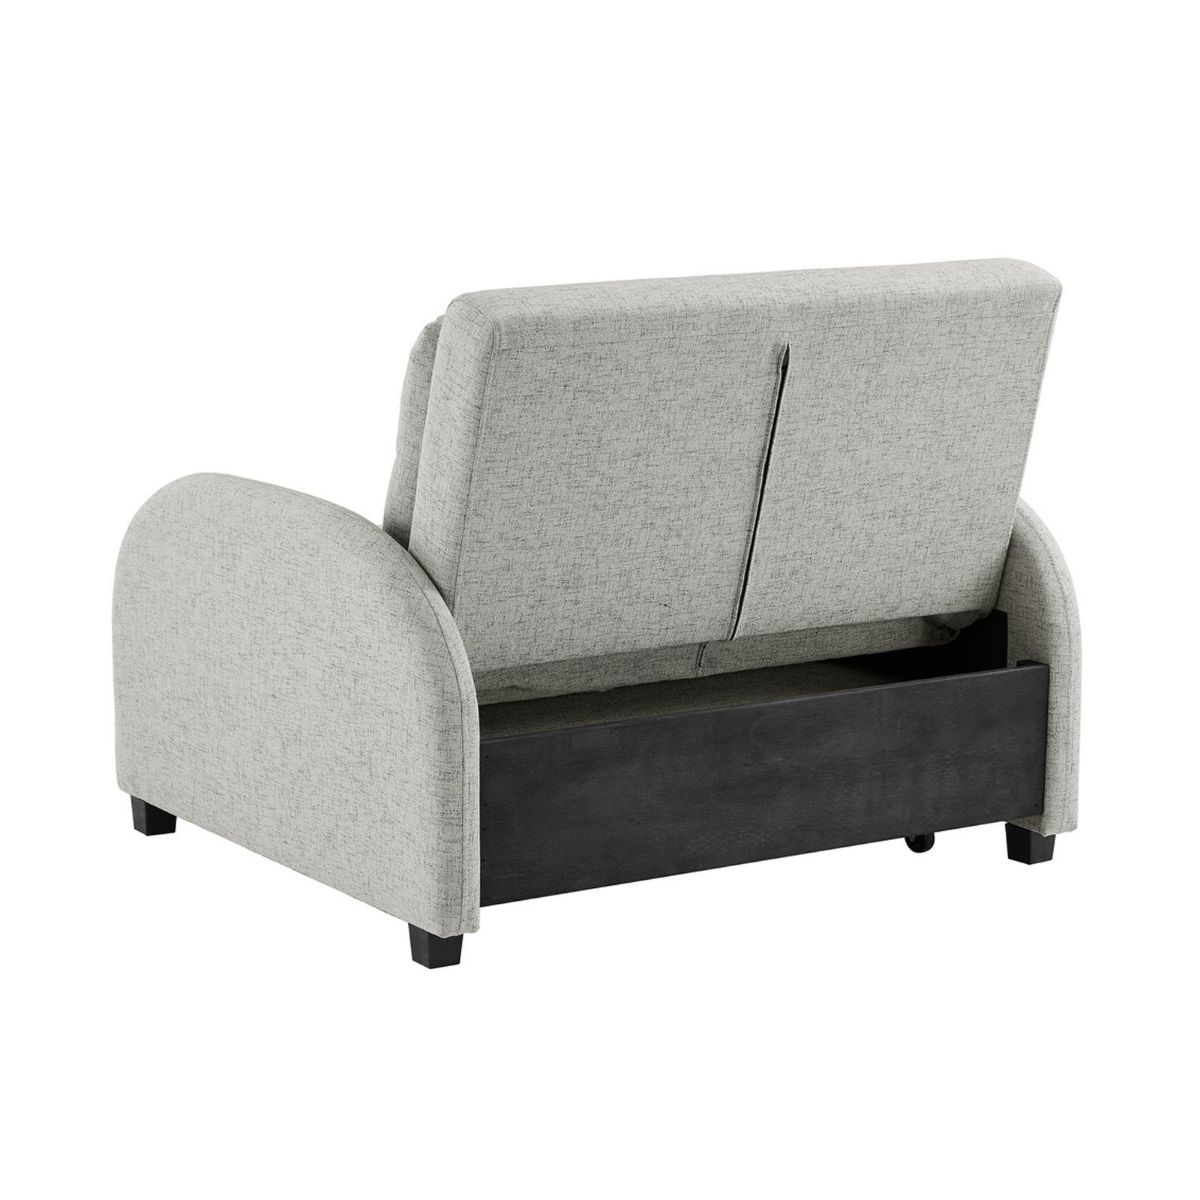 Picture of Aileen Convertible Chair Bed